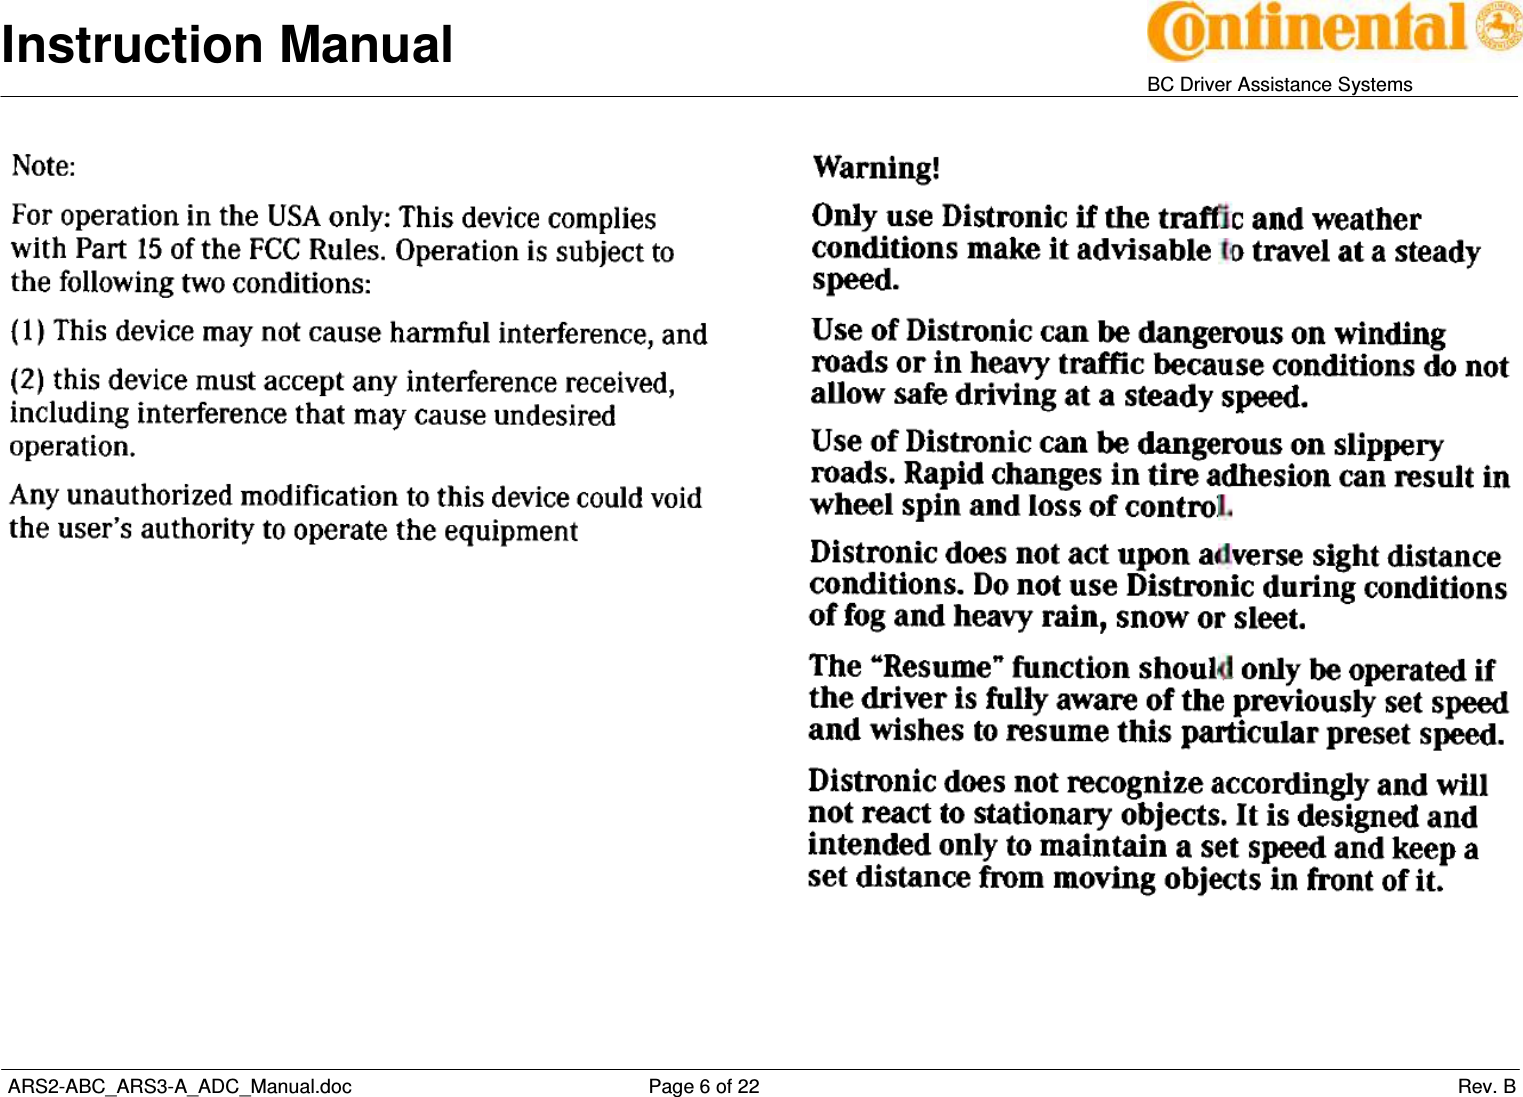 Instruction Manual   BC Driver Assistance Systems  ARS2-ABC_ARS3-A_ADC_Manual.doc     Page 6 of 22                 Rev. B   